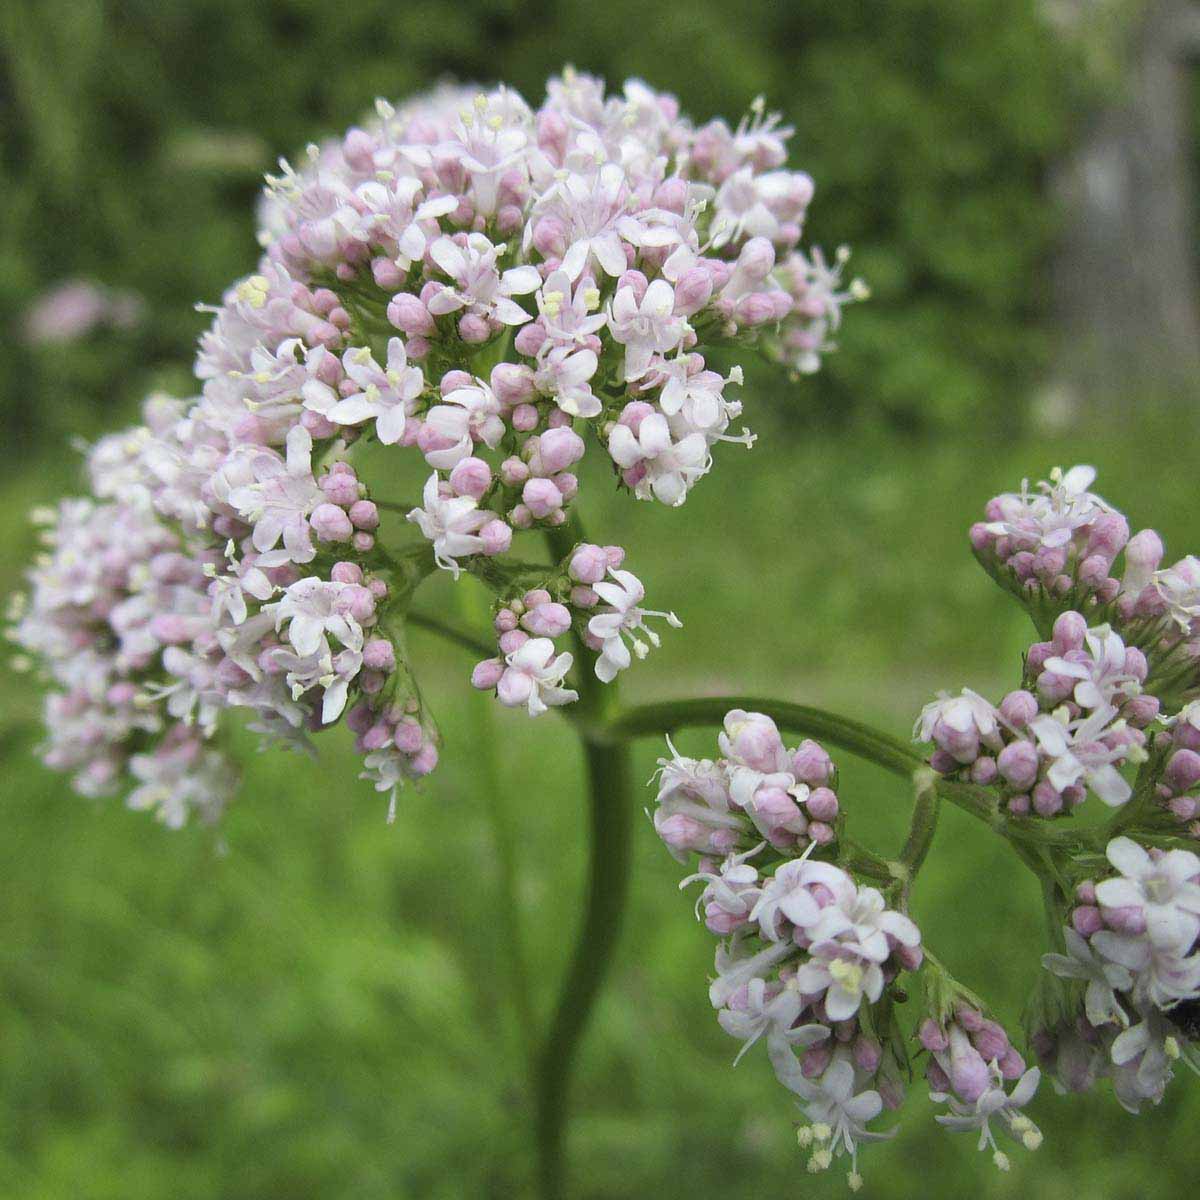 Pink bunch of blossoms on valerian plants.